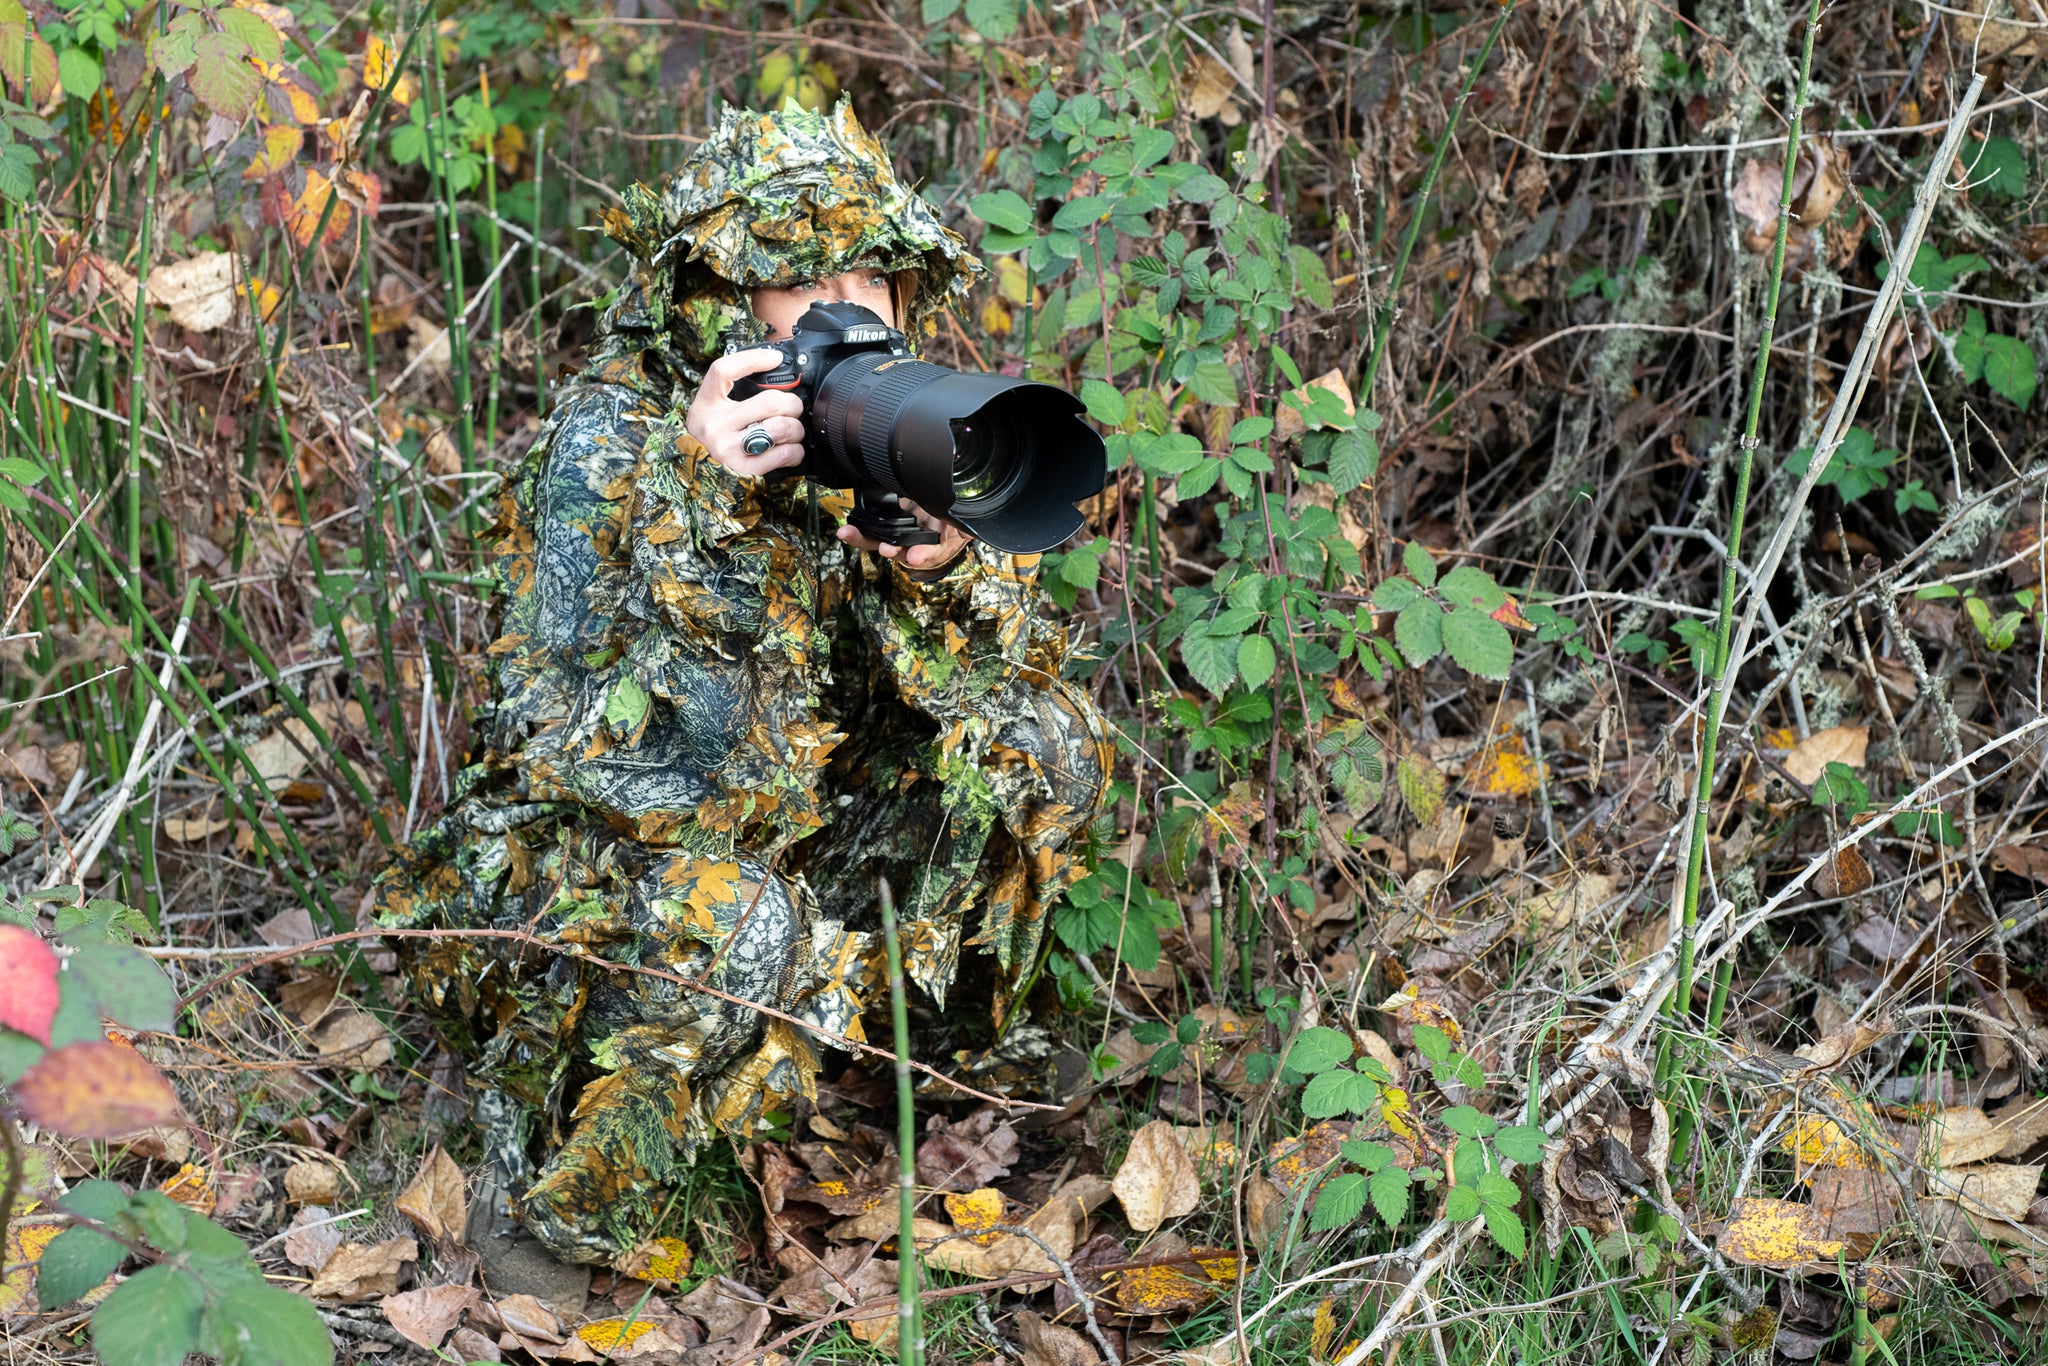 Free Ghillie Suit Photos and Vectors